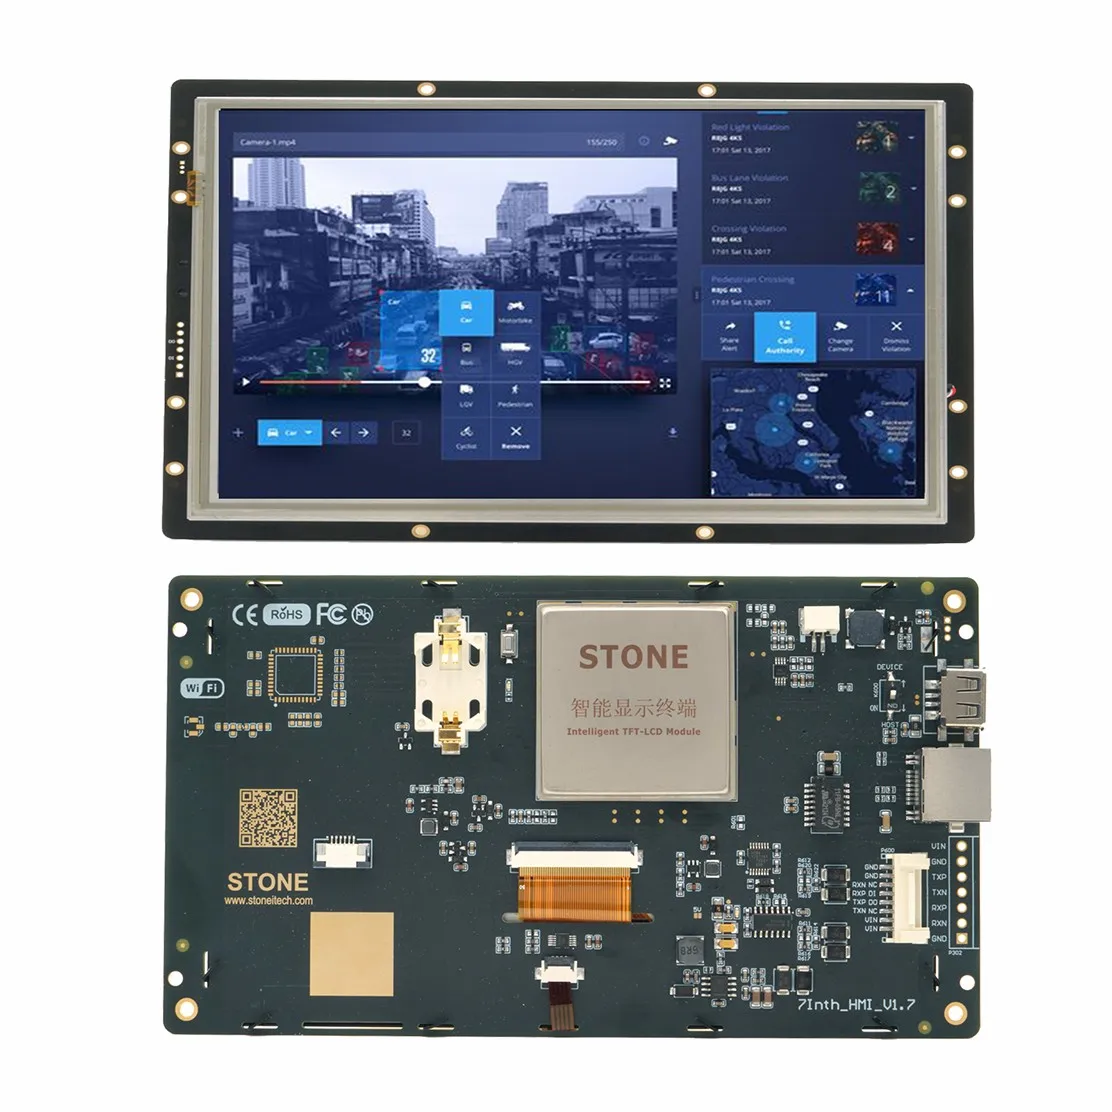 7inch TFT Panel All passed CE/RoHS/FCC/ISO9001 International Certification and 24 hour Aging Testing HMI display